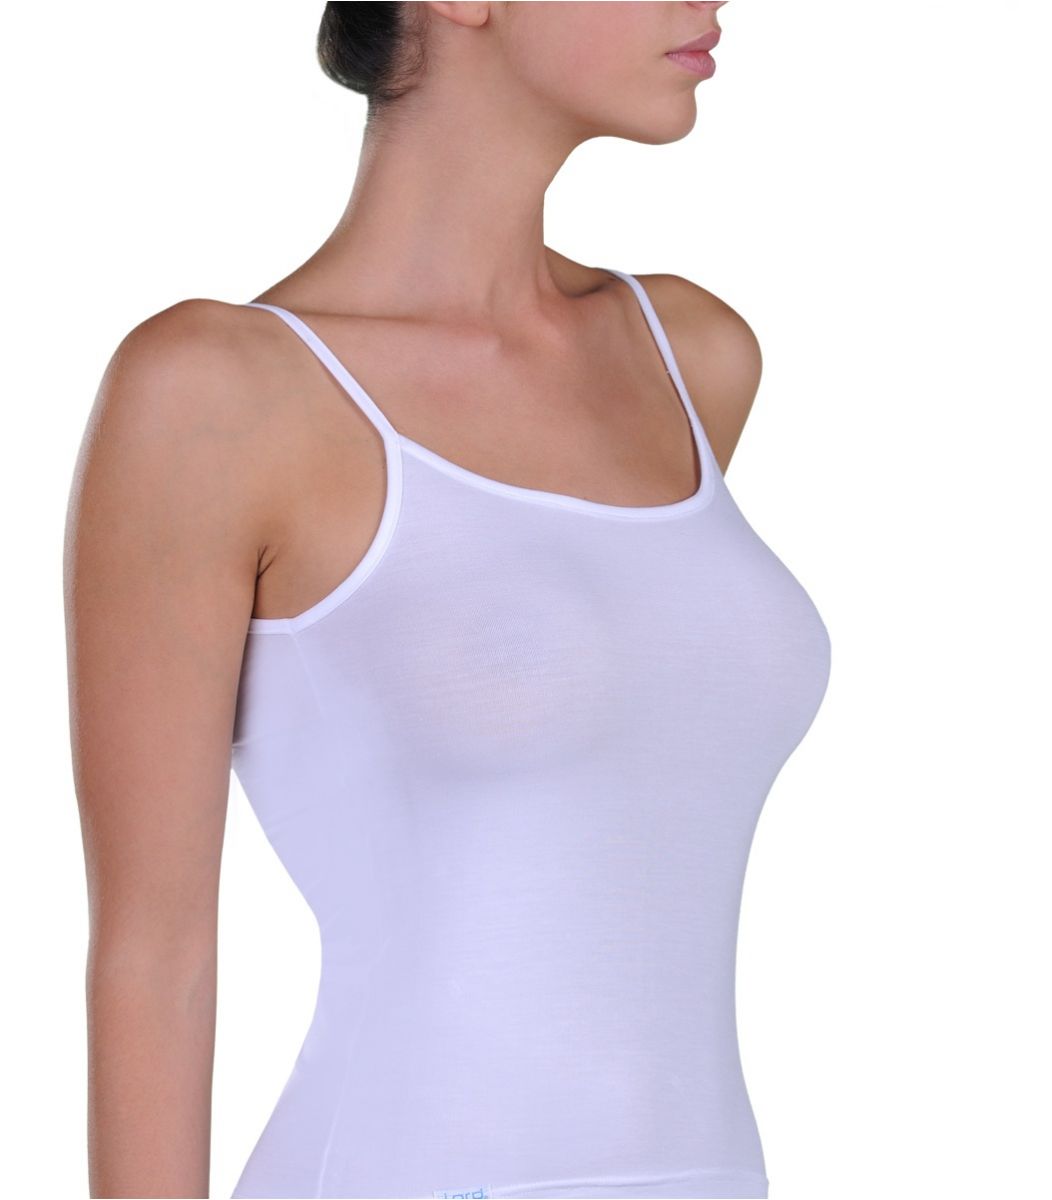 Camisole, micromodal, white